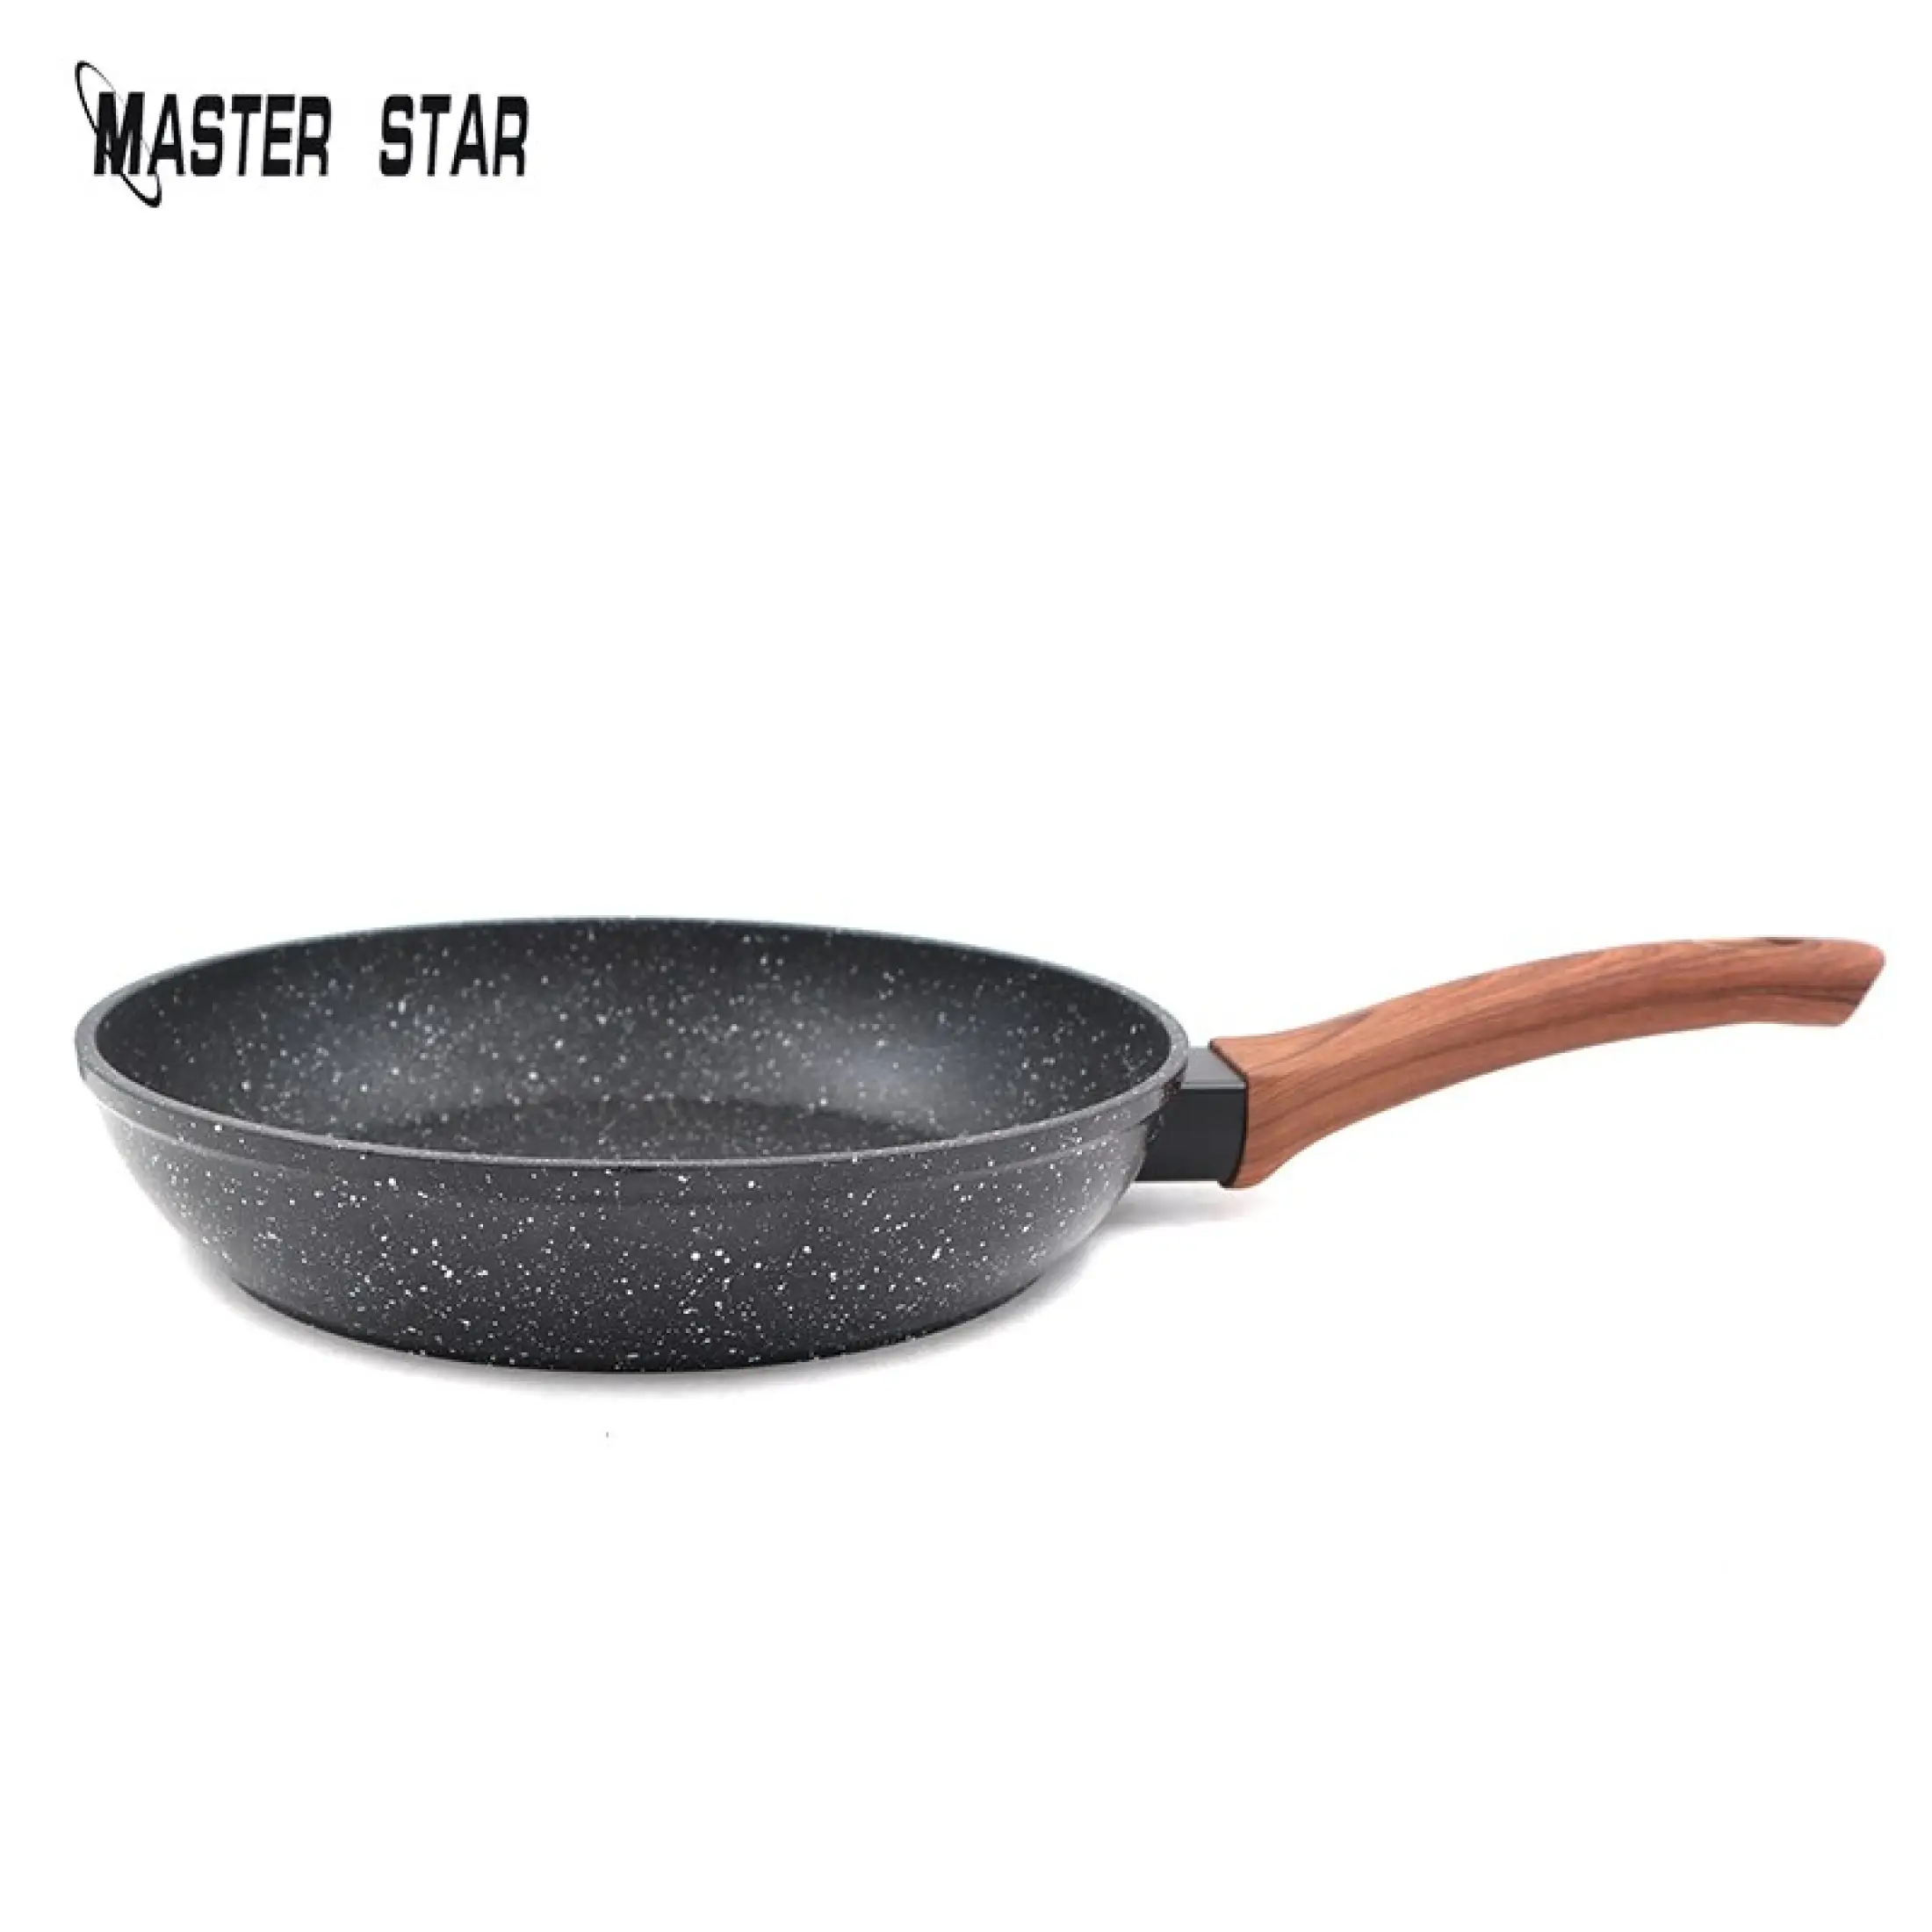 Durable Marble Granit Non Toxin Coated Saute Saucepan 28cm with Lid Wood Effect Handles This Skillet Saucepan is Suitable for Induction and Any Stove